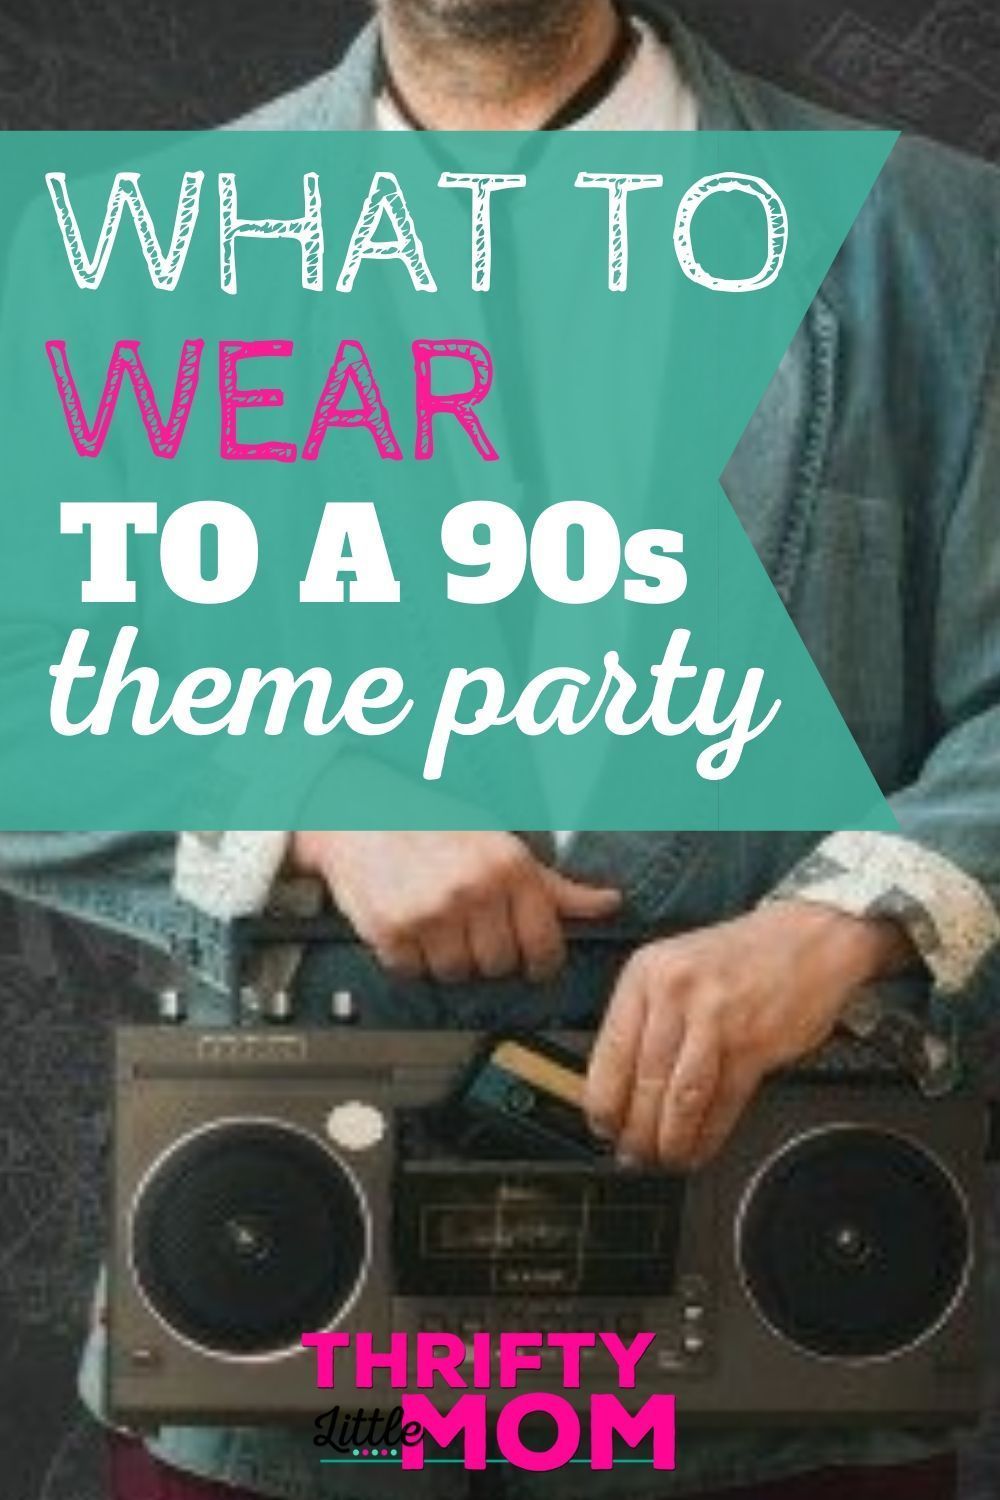 Wha to wear to a 90s party - Wha to wear to a 90s party -   11 style 90s party ideas